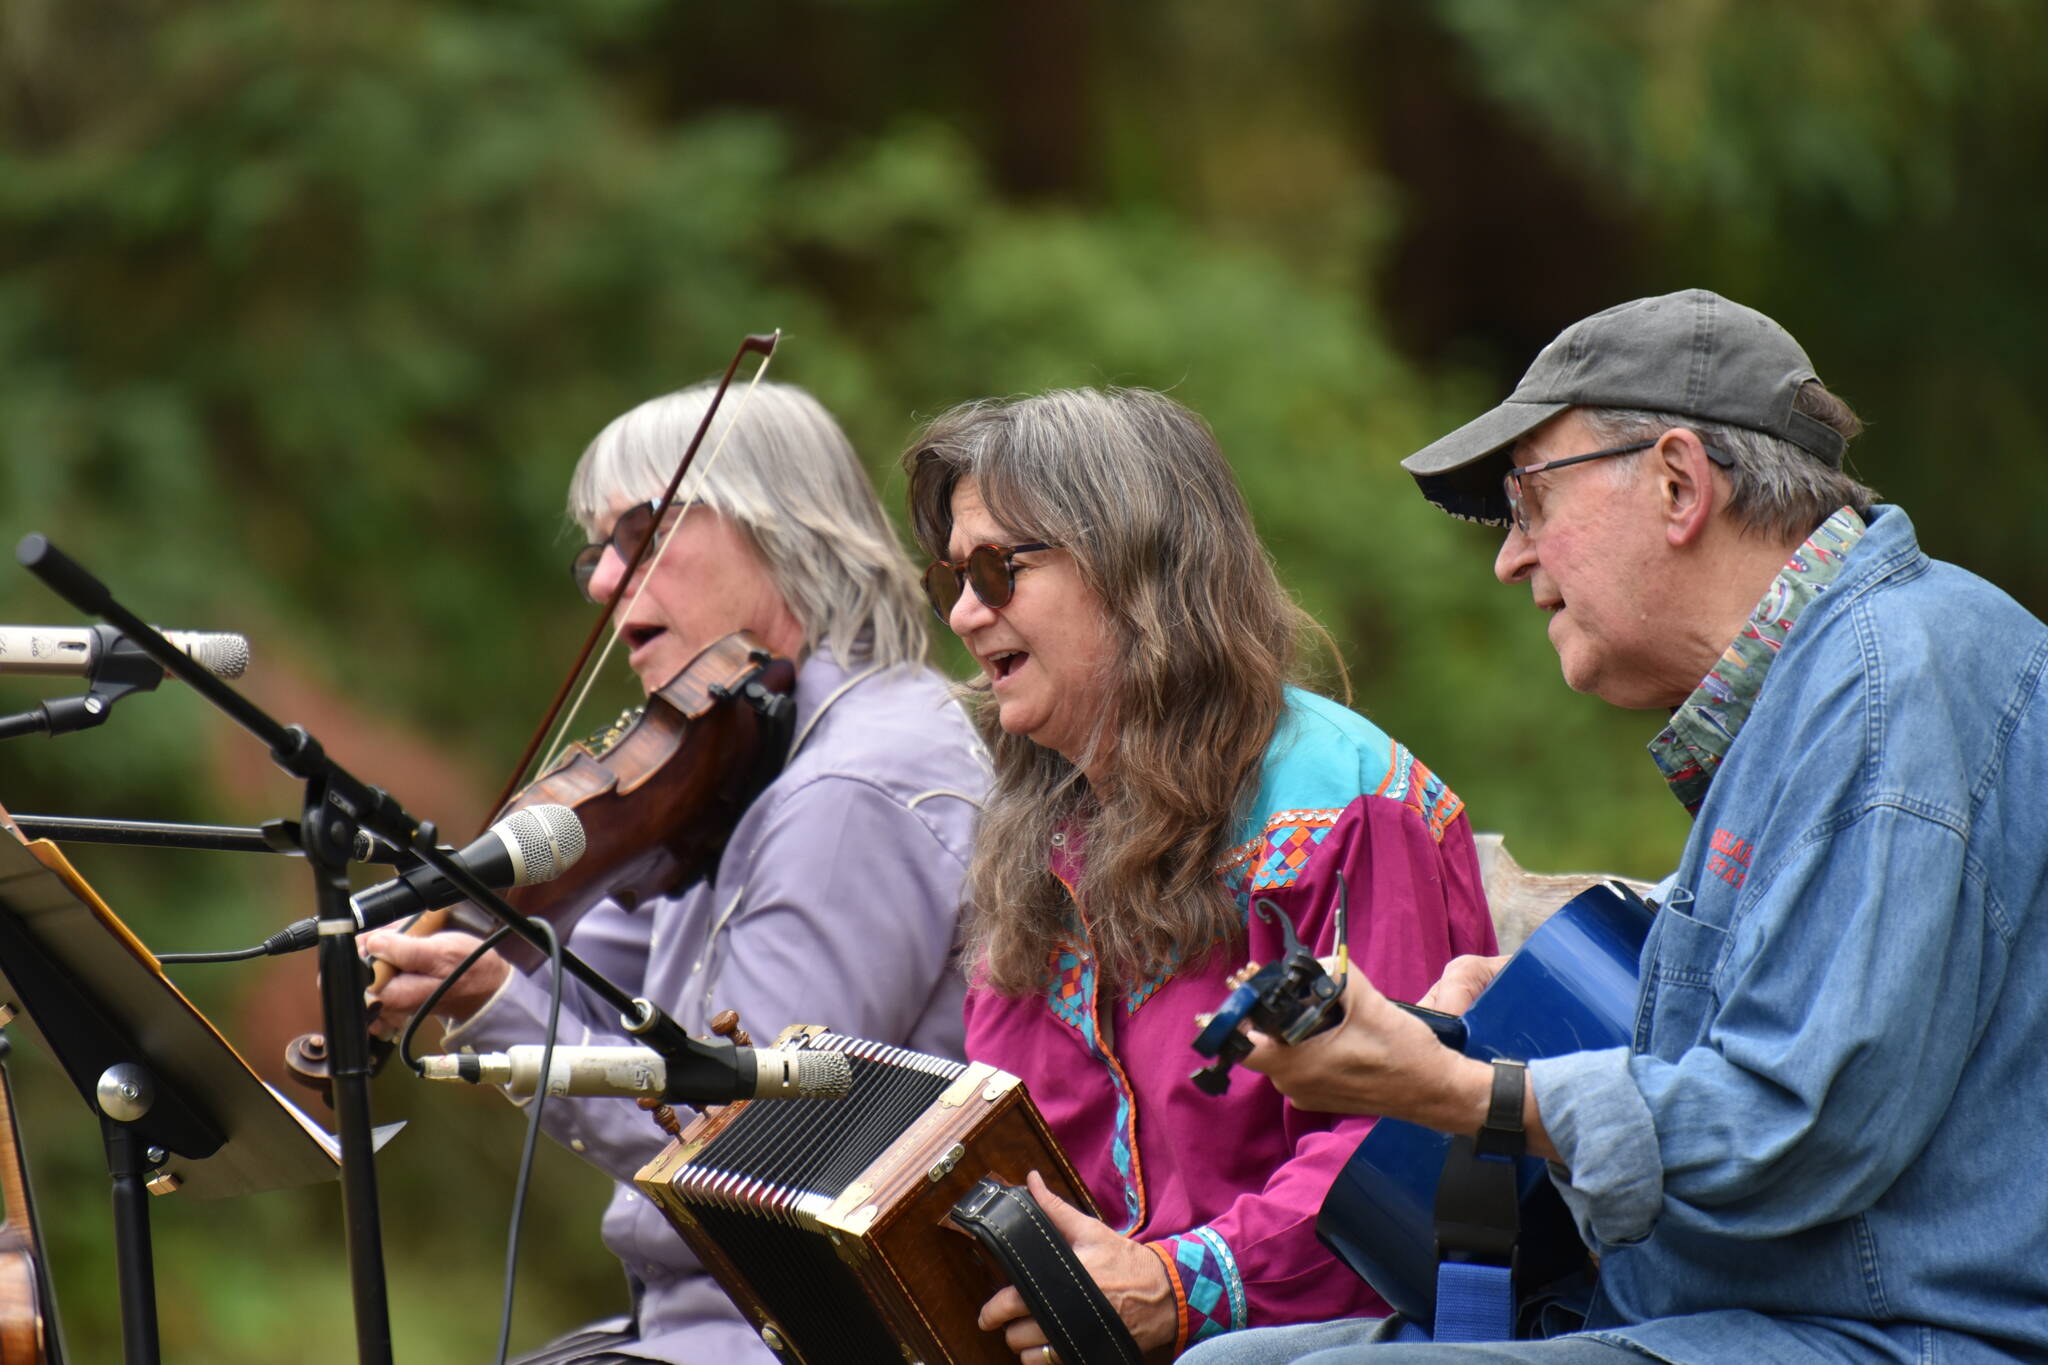 Members of the WHOZYAMAMA band perform a community concert at the Moritani Preserve.